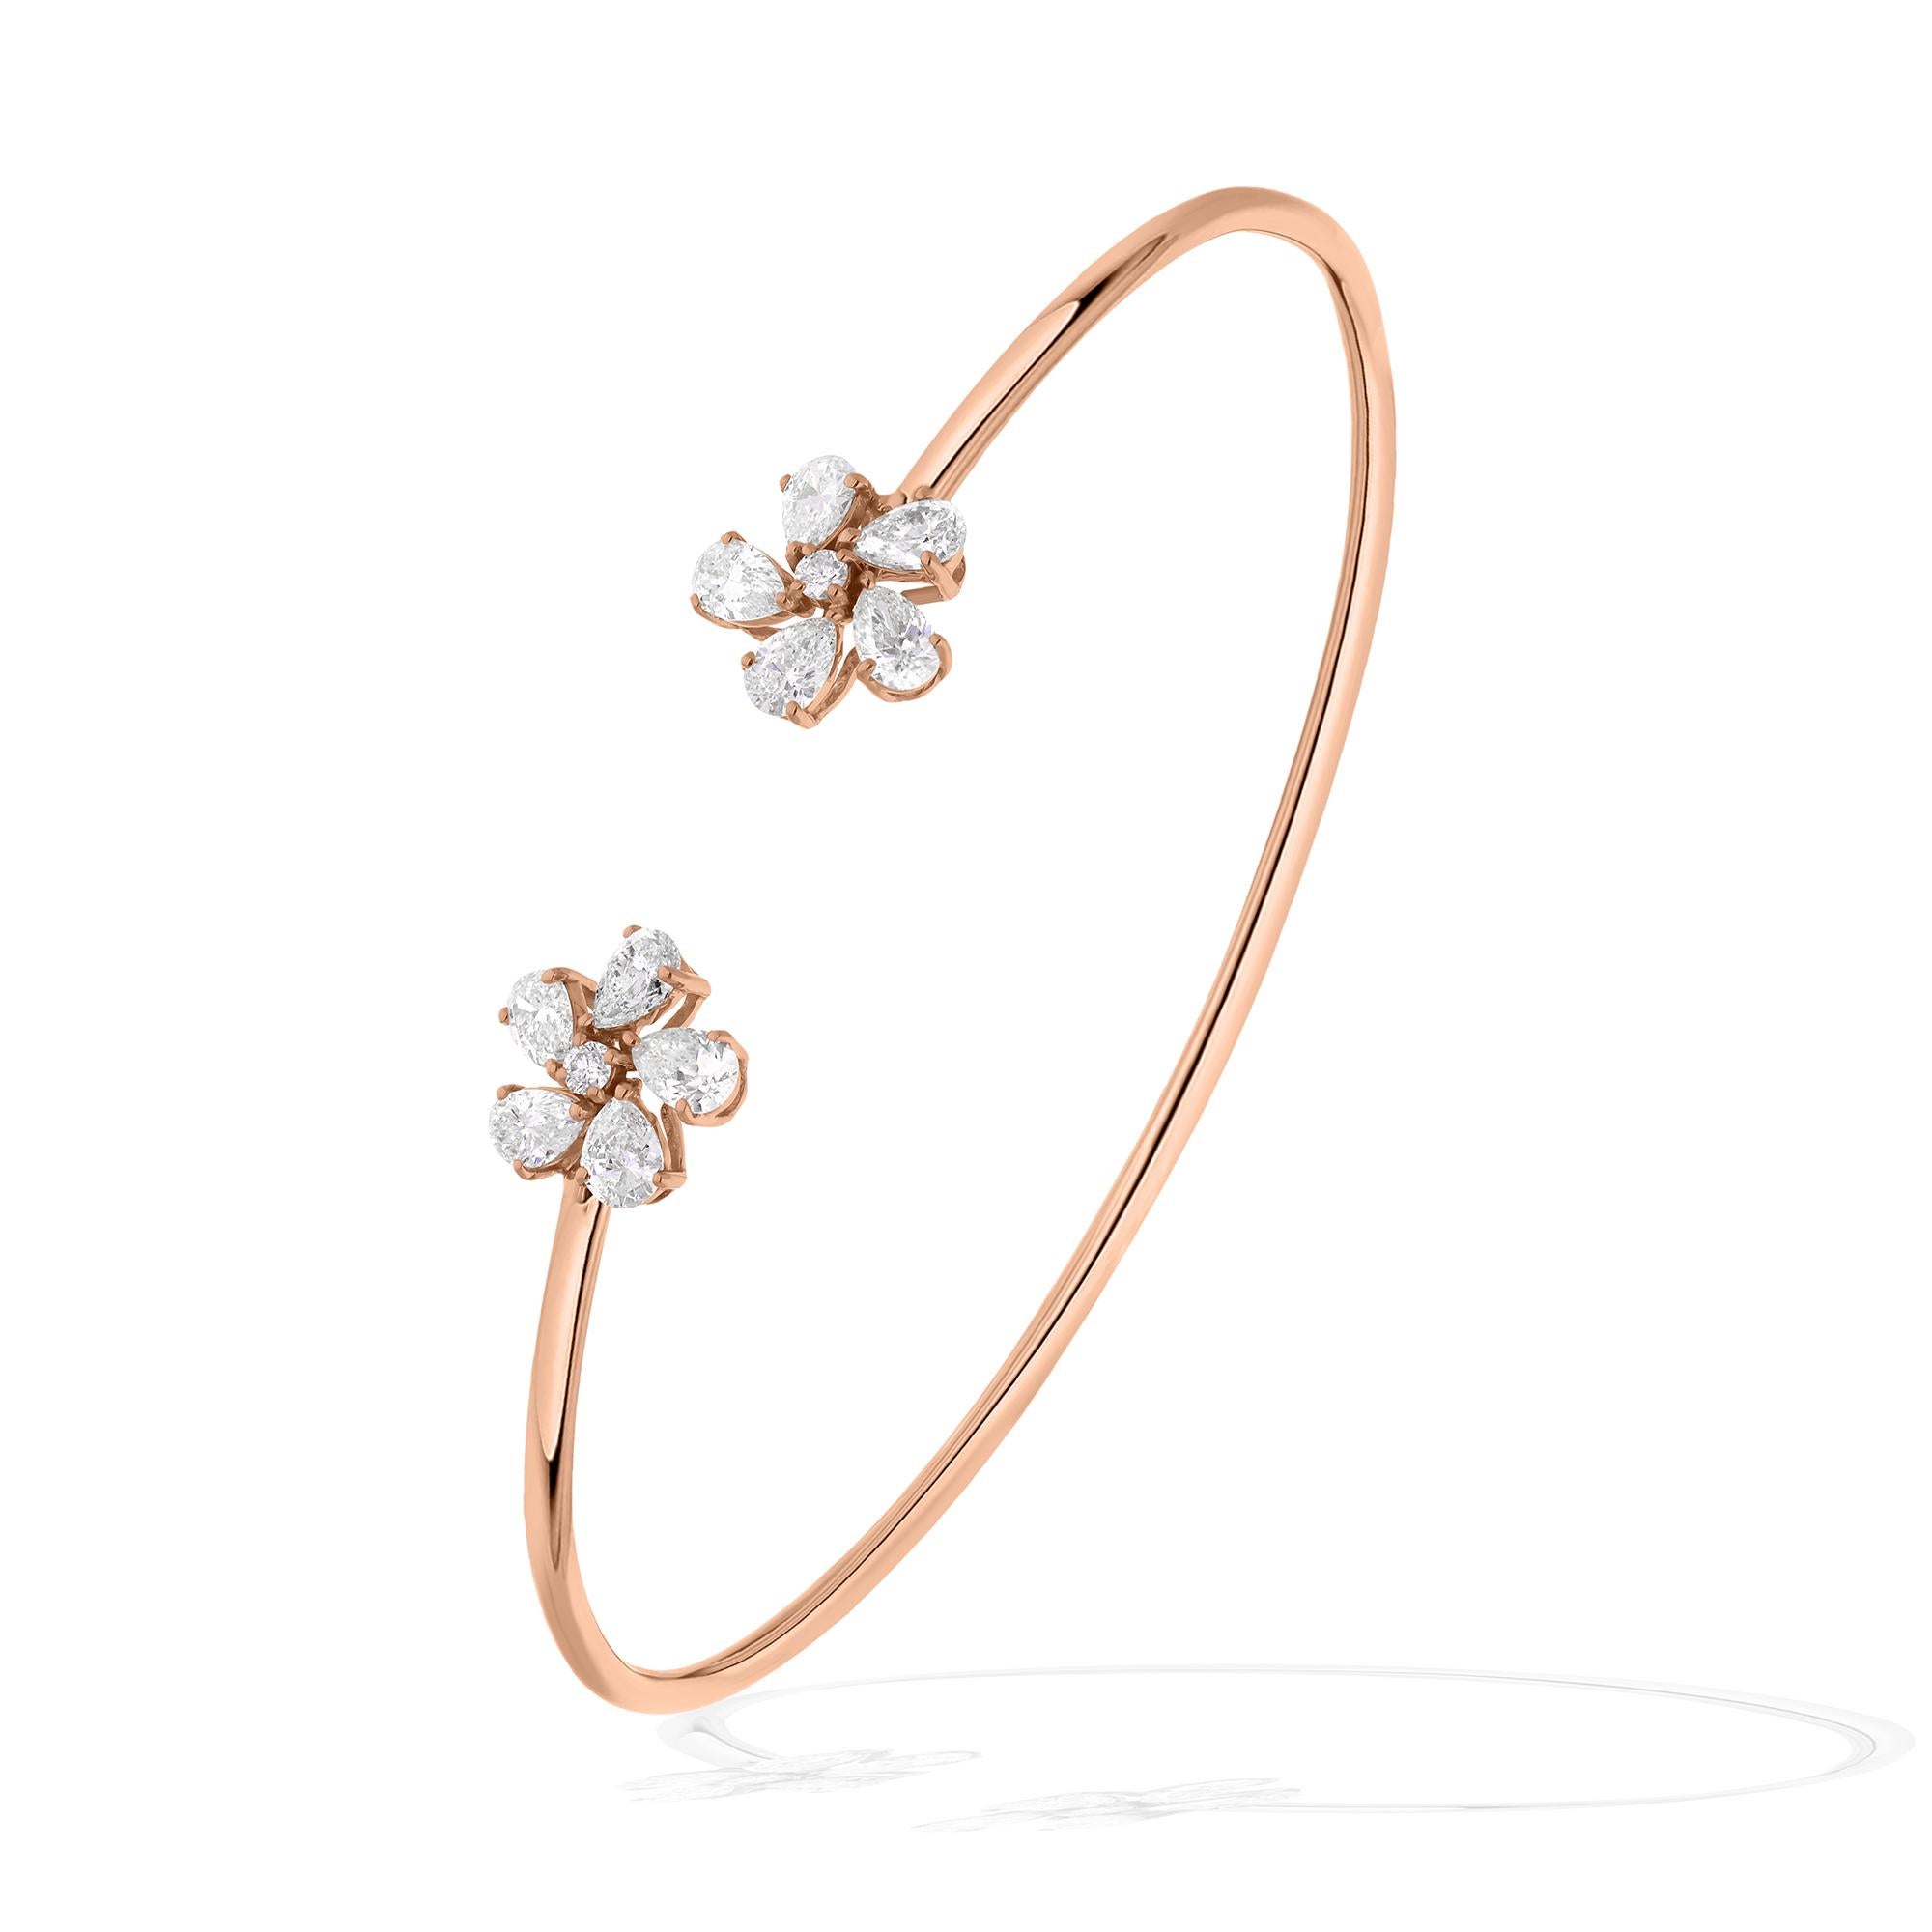 This exquisite cuff bangle bracelet features a dazzling centerpiece: a meticulously crafted round diamond flower set in 18 karat rose gold. The brilliance of the diamond is enhanced by its impressive clarity, graded SI (Slightly Included), ensuring